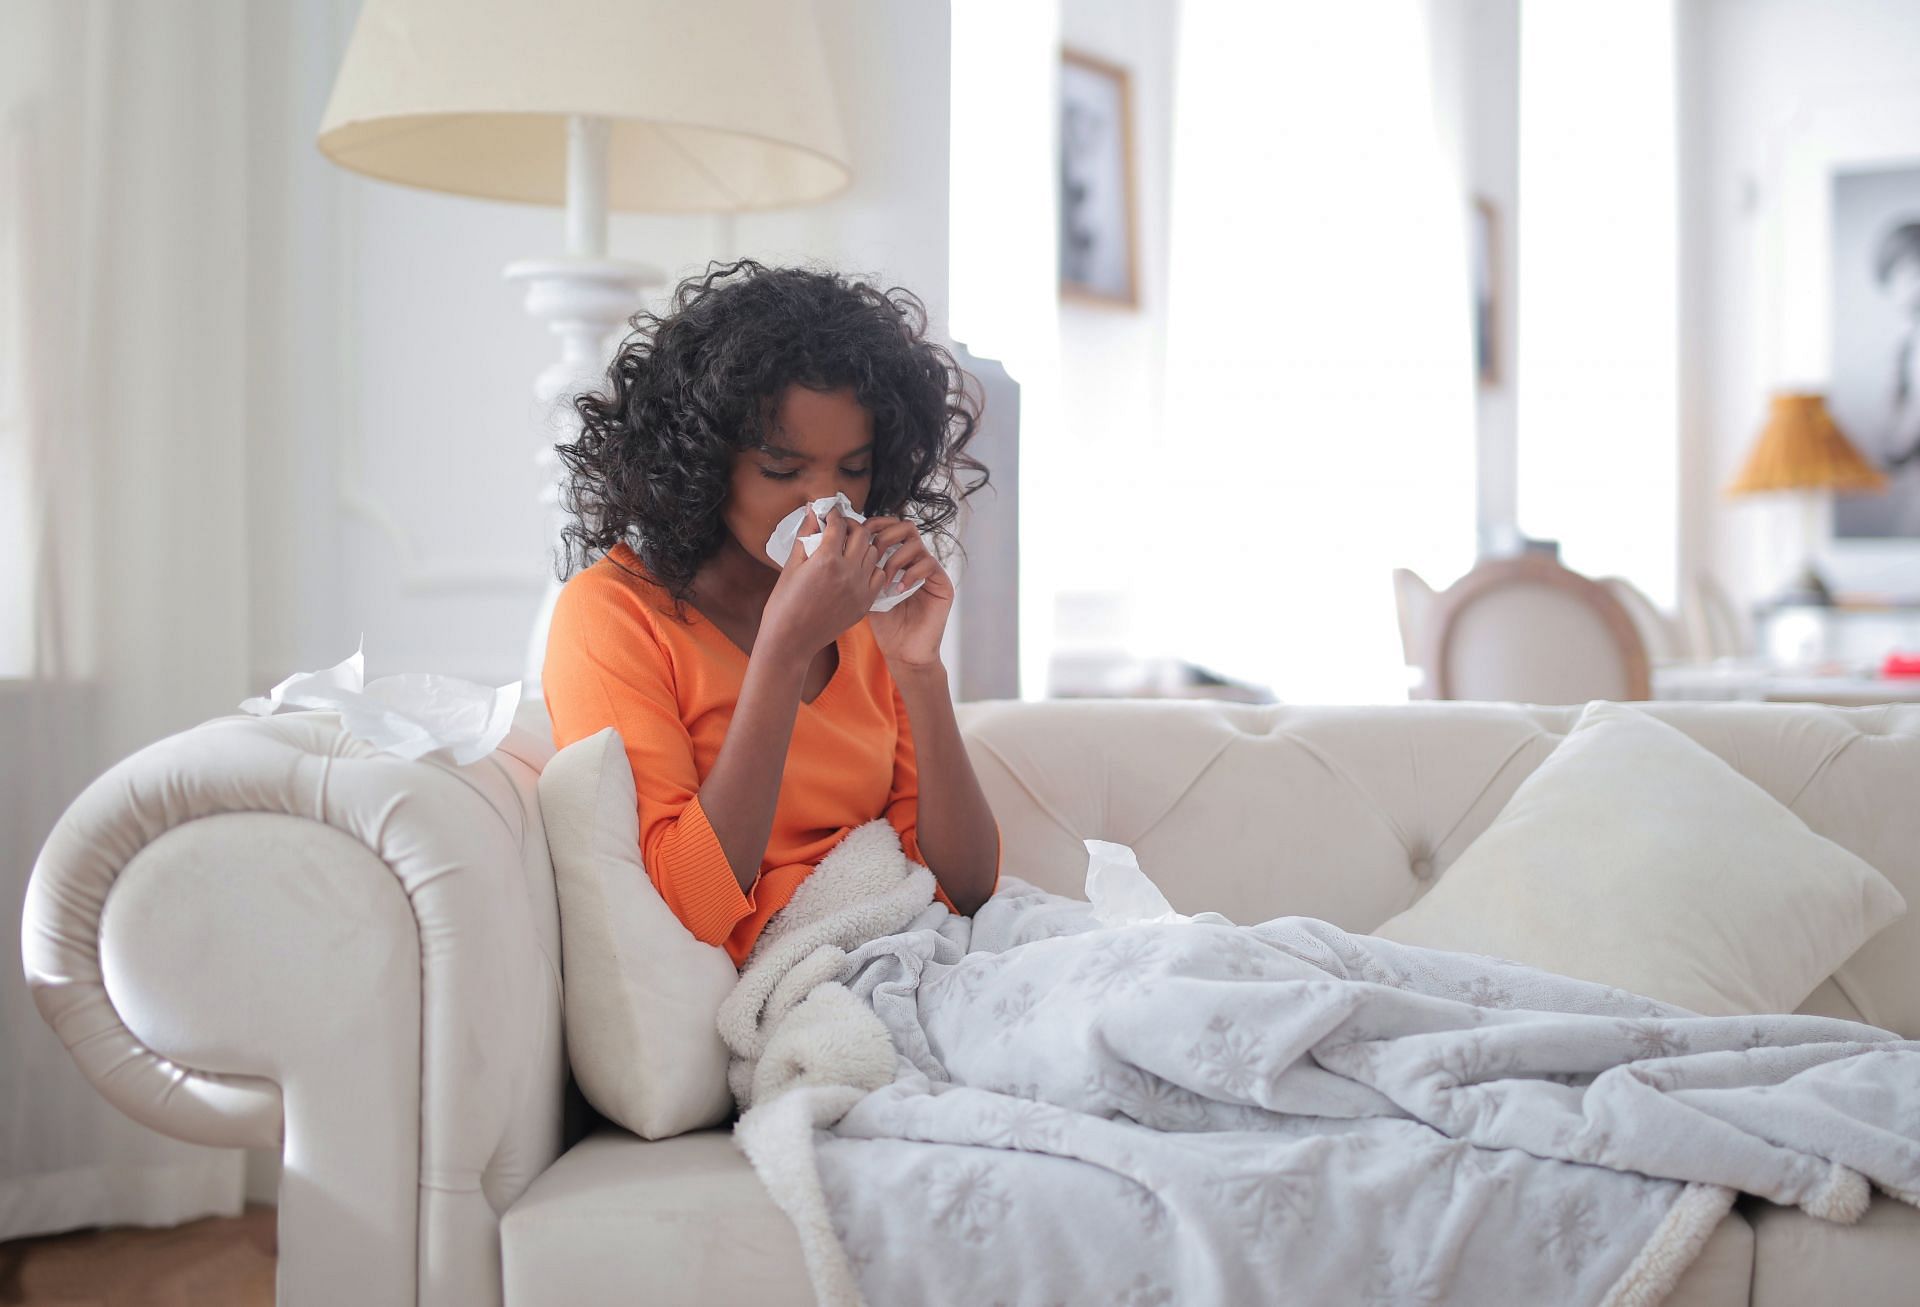 Resting when sick is important for tissue growth (Image sourced via Pexels / Photo by piacquadio)